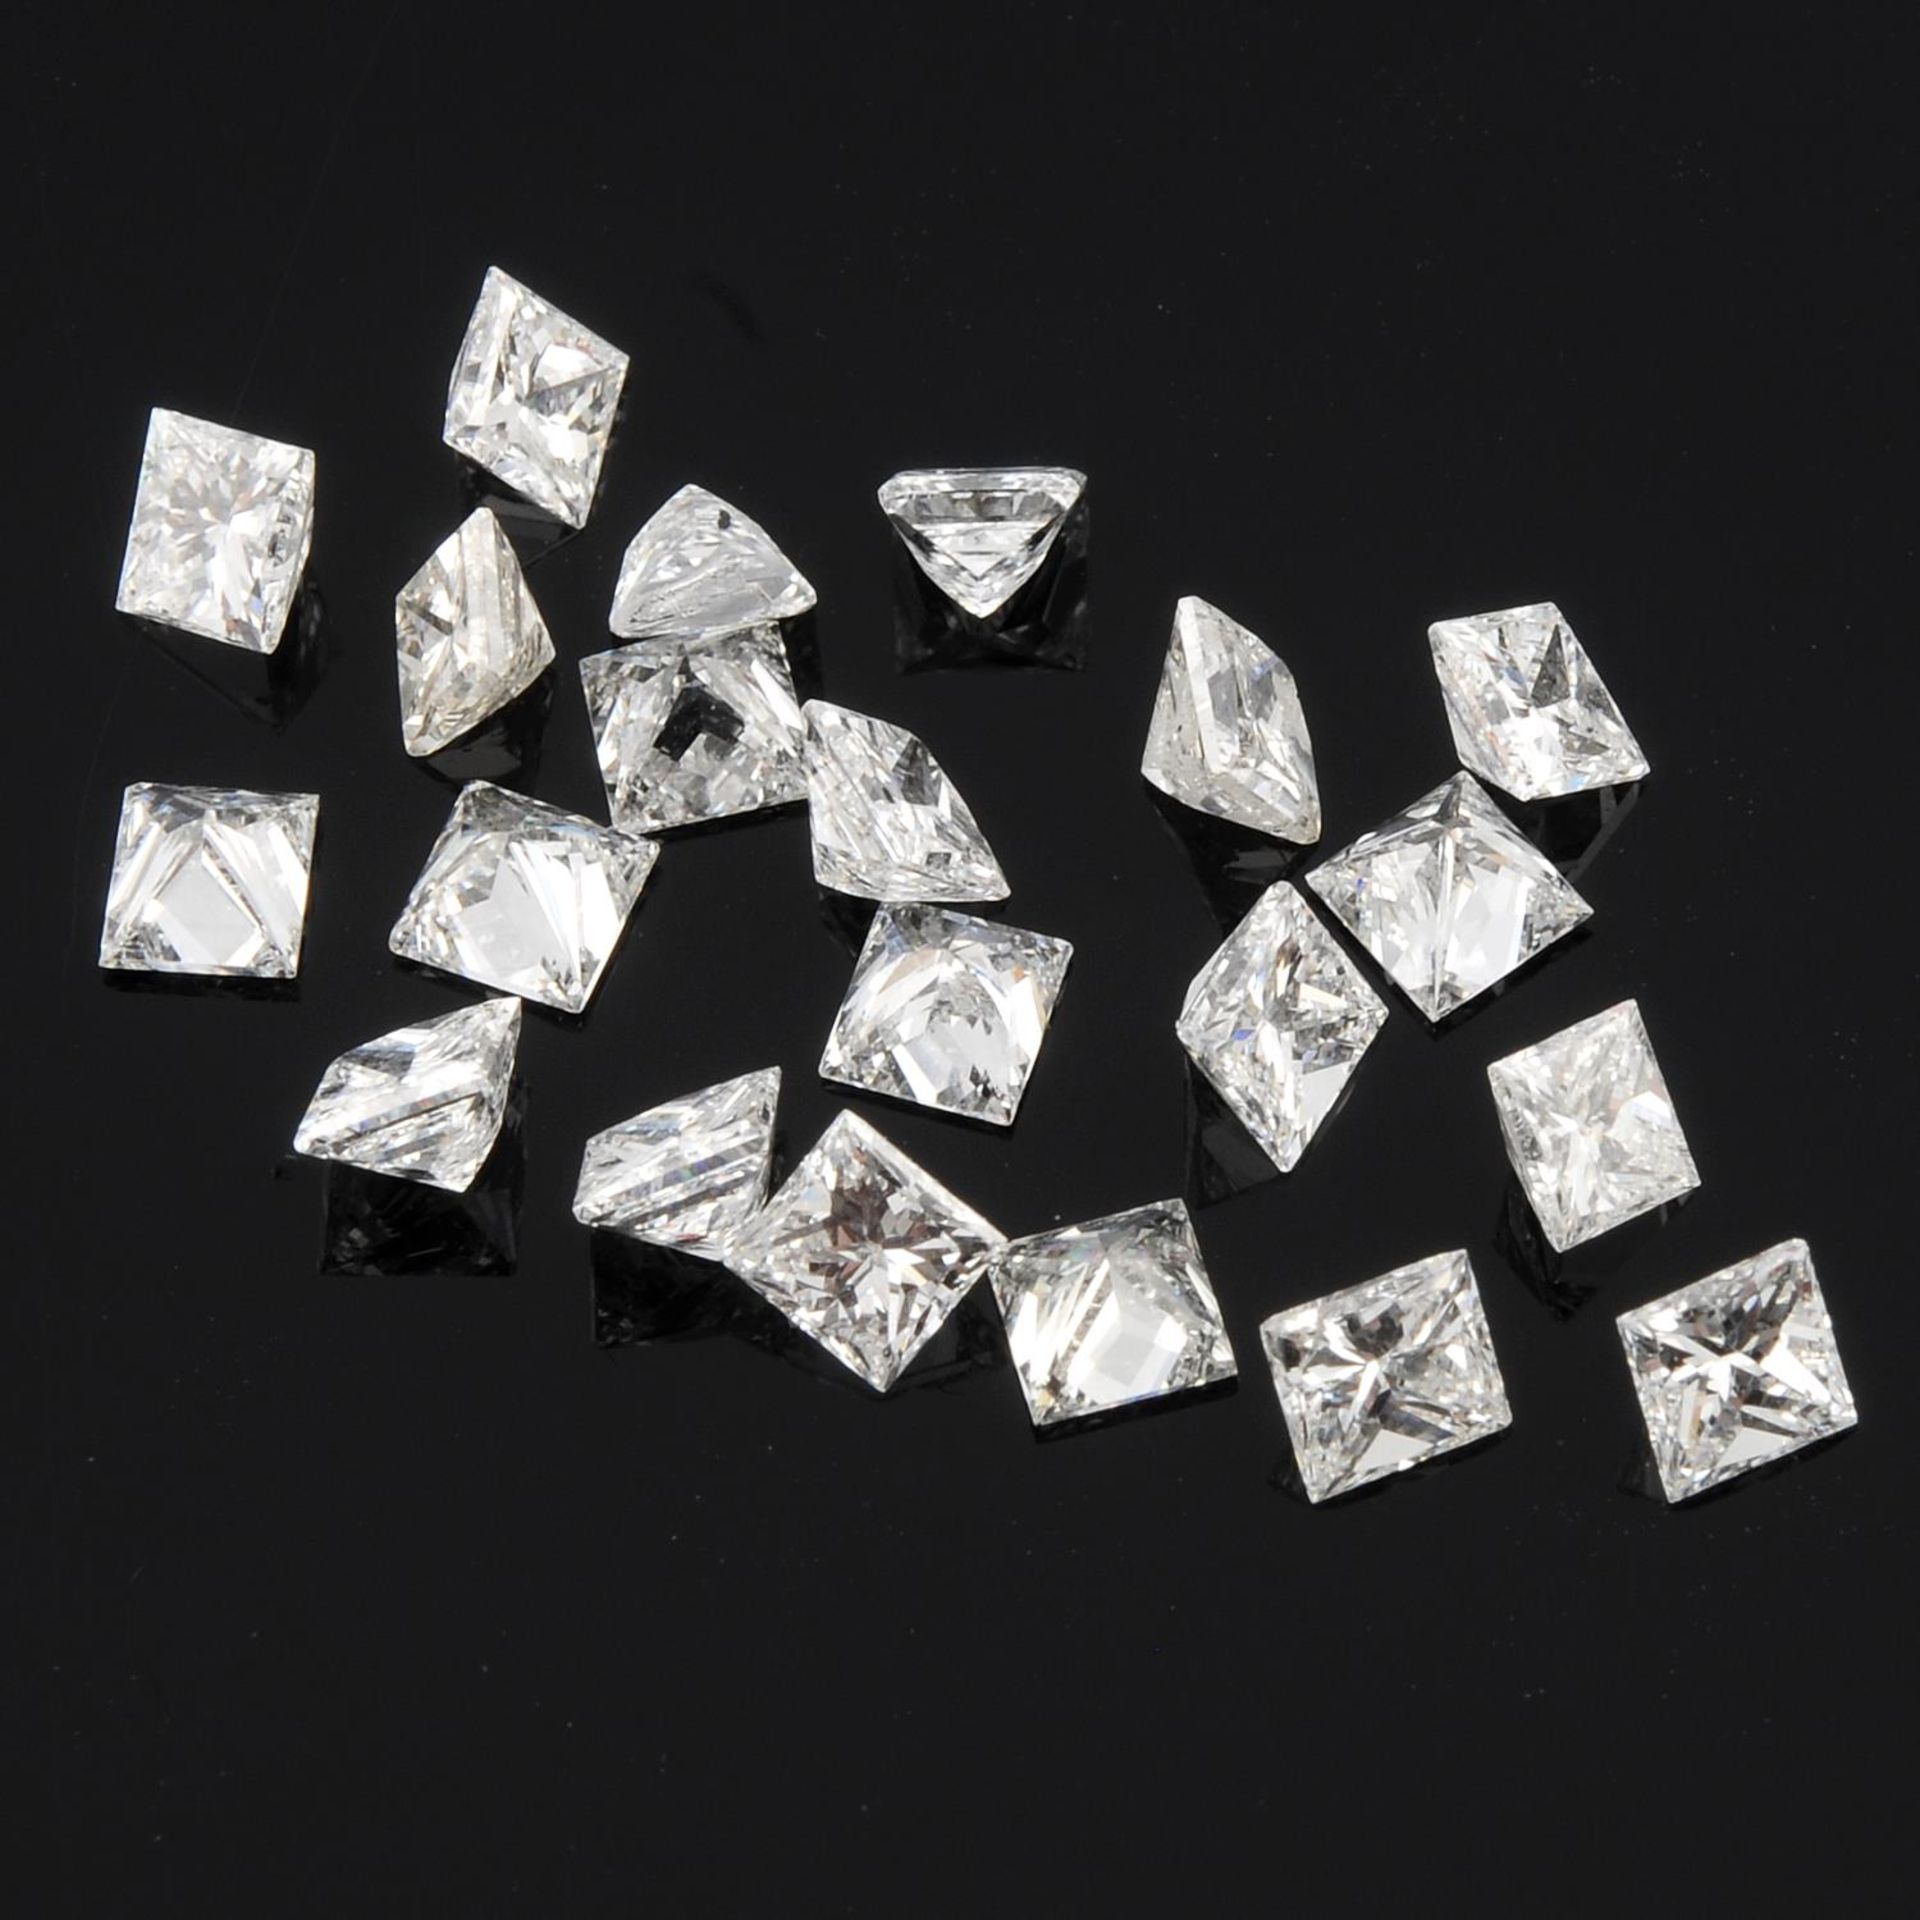 Selection of square shape diamonds, weighing 3.97ct.